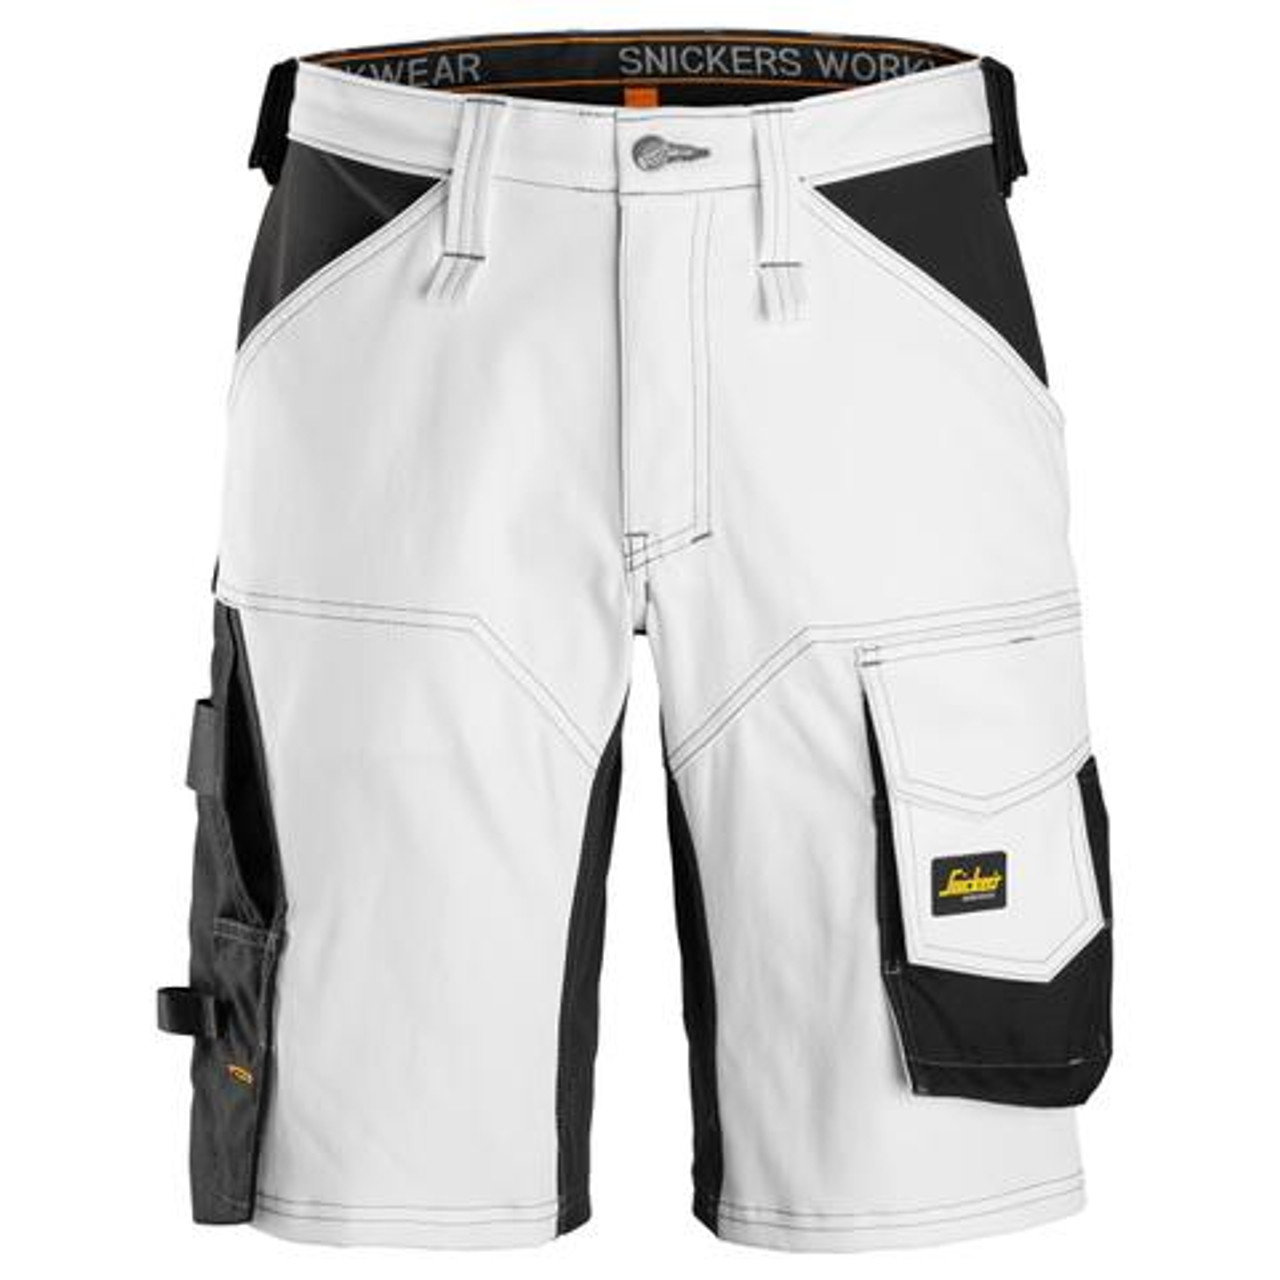 Buy online in Australia and New Zealand SNICKERS Shorts for Electricians that are comfortable and durable.